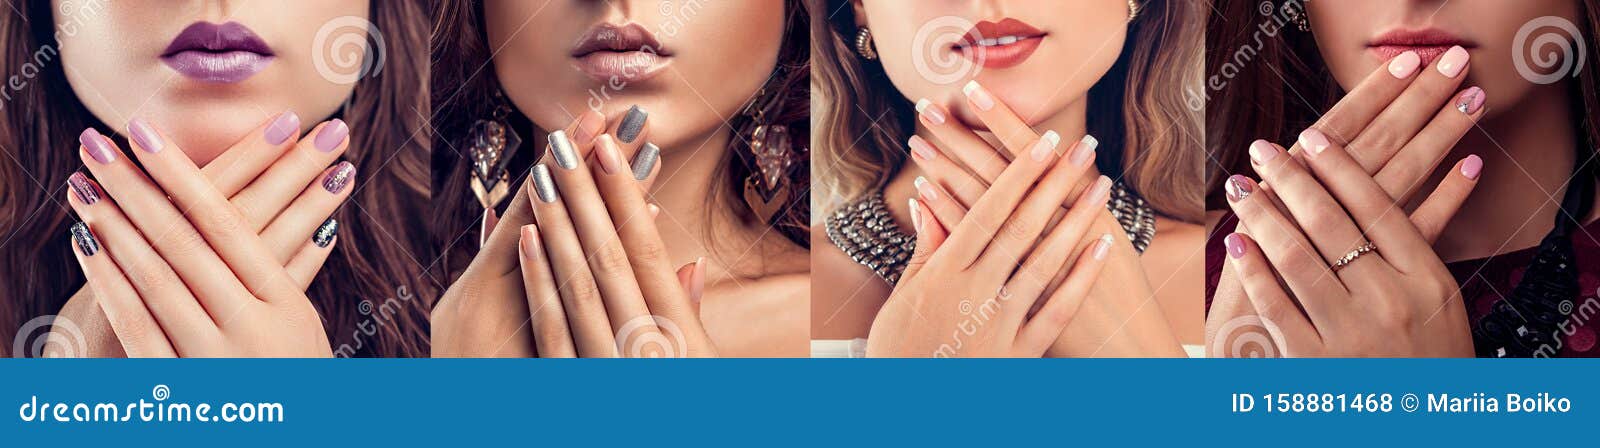 Nail Art and Design. Beauty Fashion Model with Different Make-up and  Manicure Wearing Jewelry. Set of Nude Looks Stock Image - Image of look,  earring: 158881461